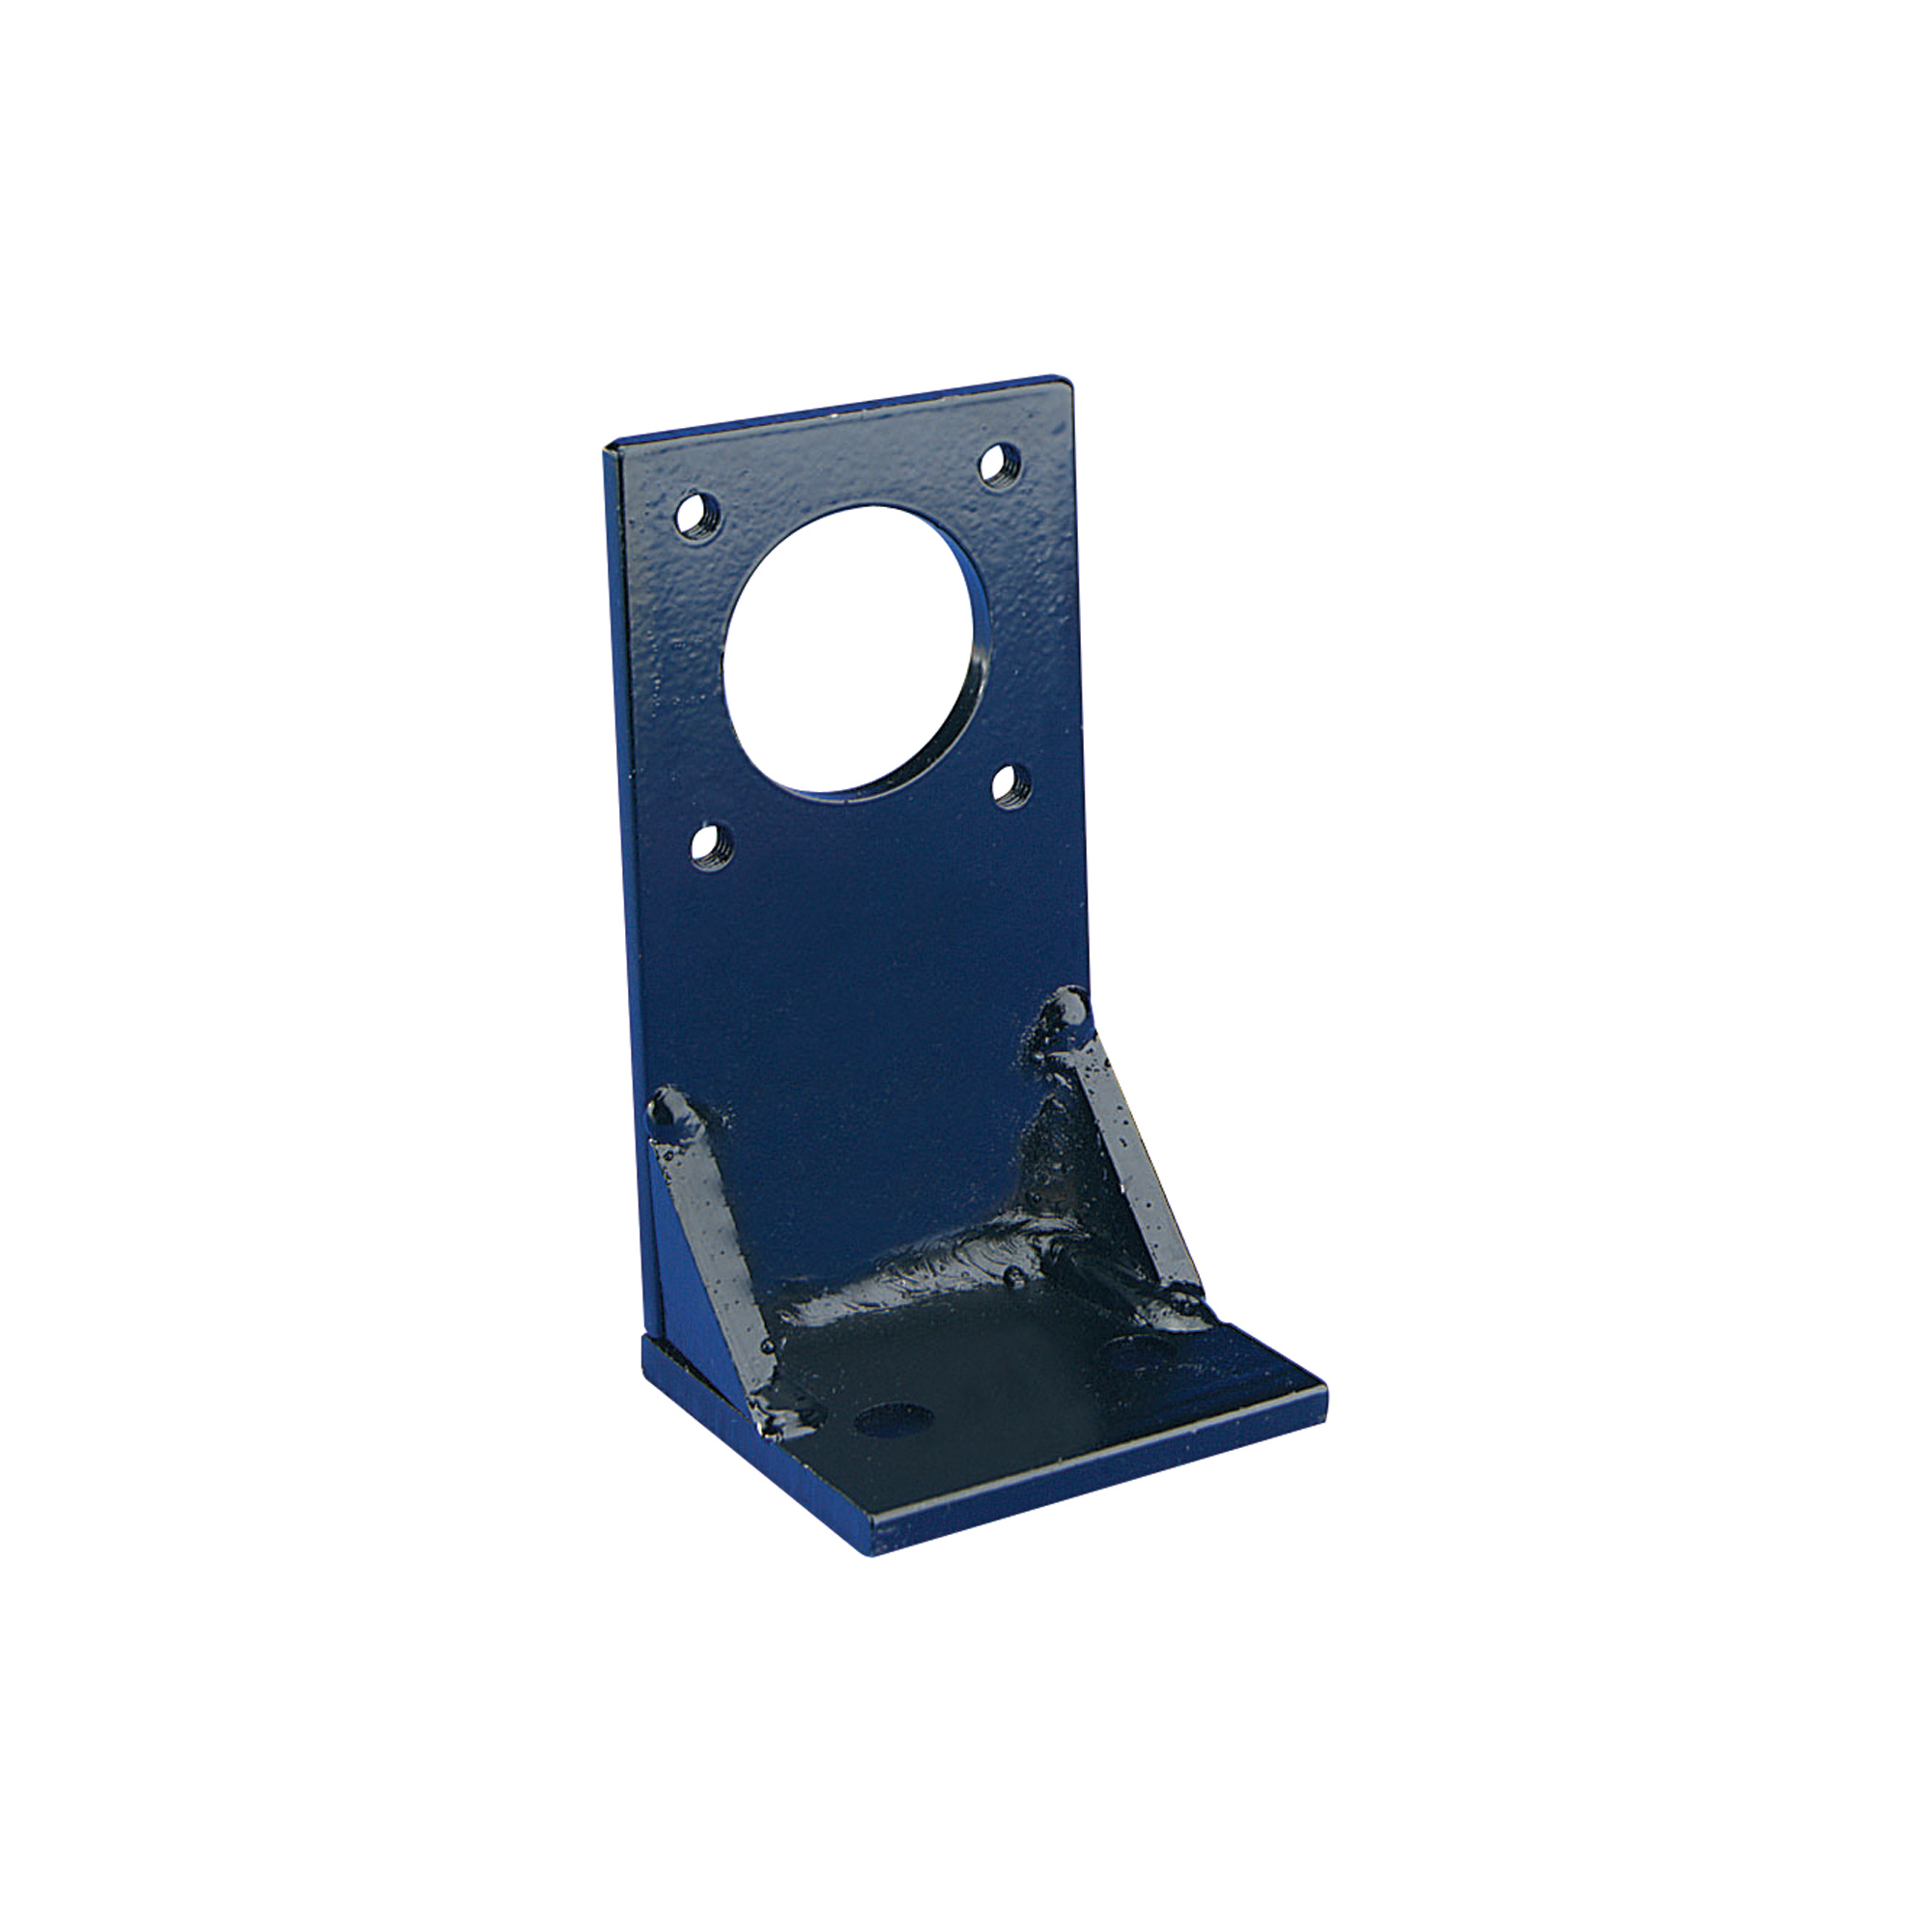 Haldex Concentric Angle Type Mount, use w/ 11, 13.6 and 16 GPM 2-Stage Hydraulic Pumps